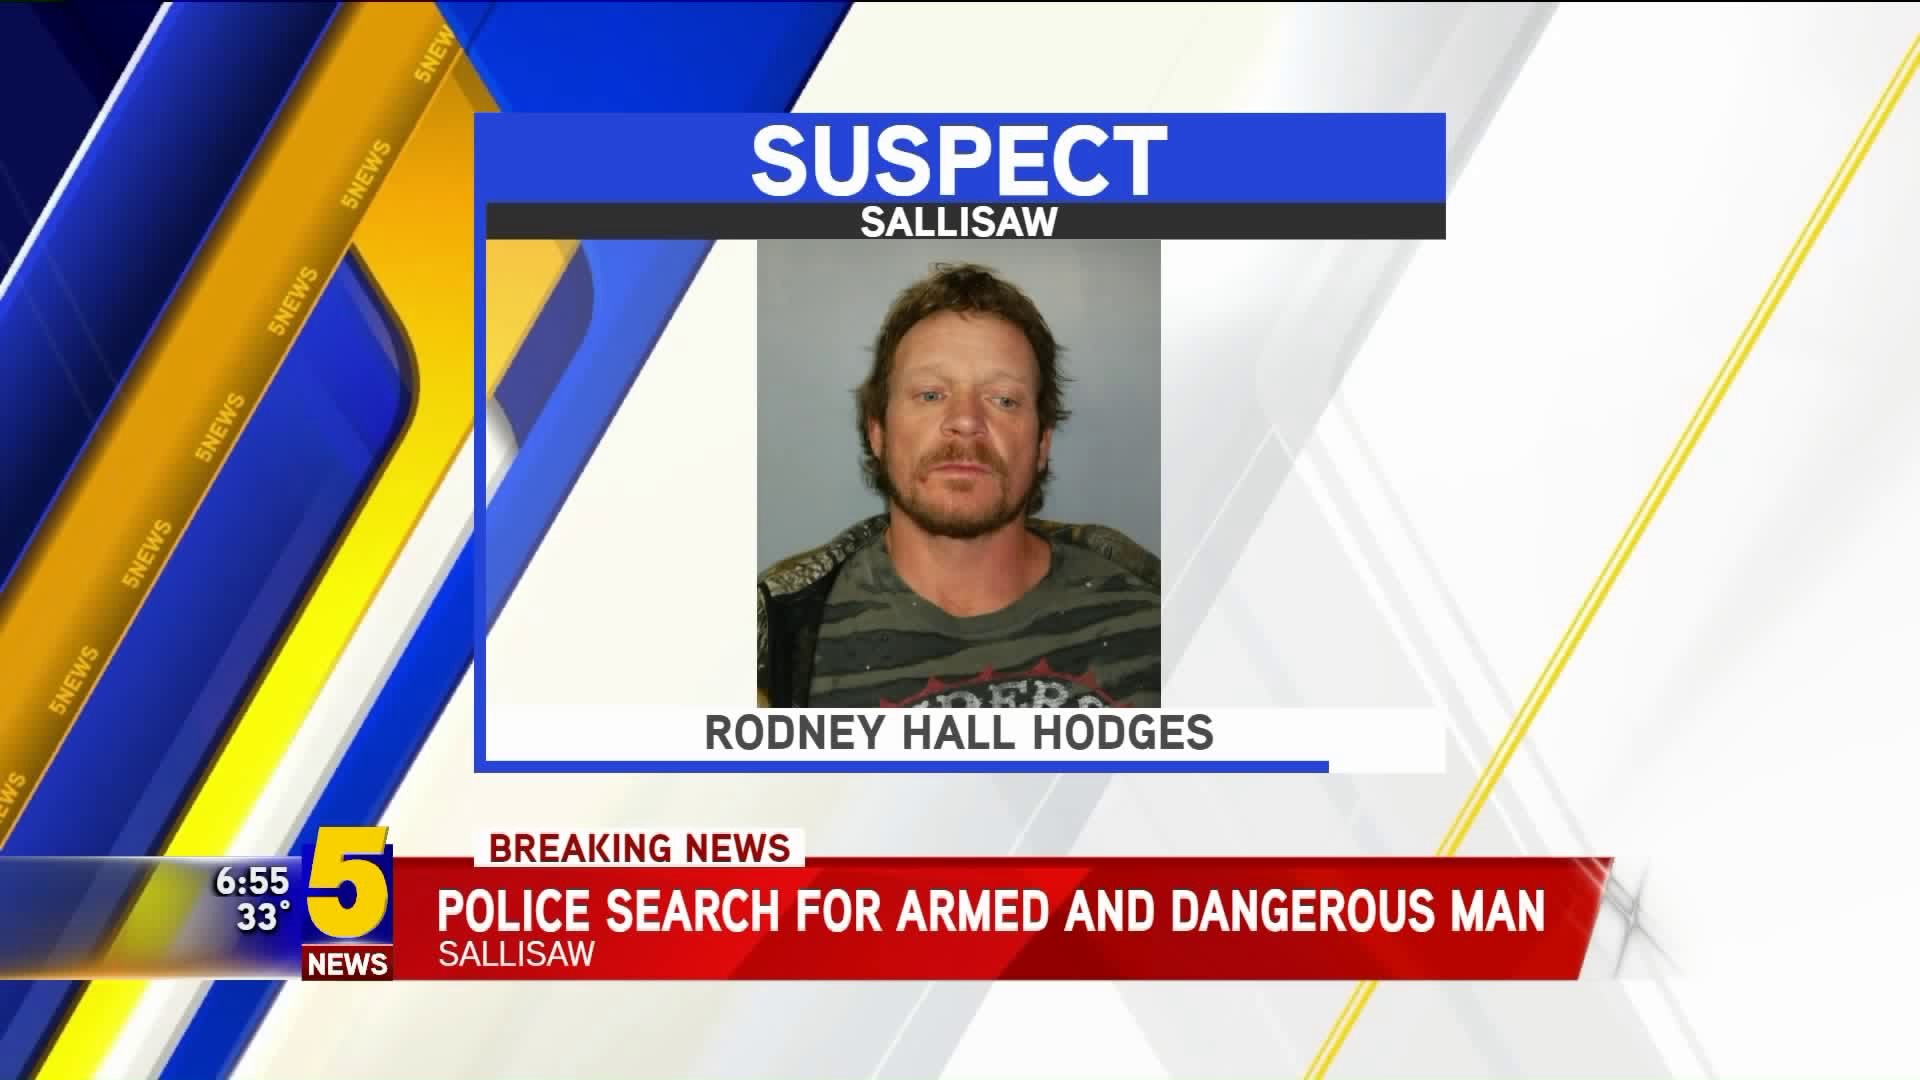 Police Search For Armed And Dangerous Man